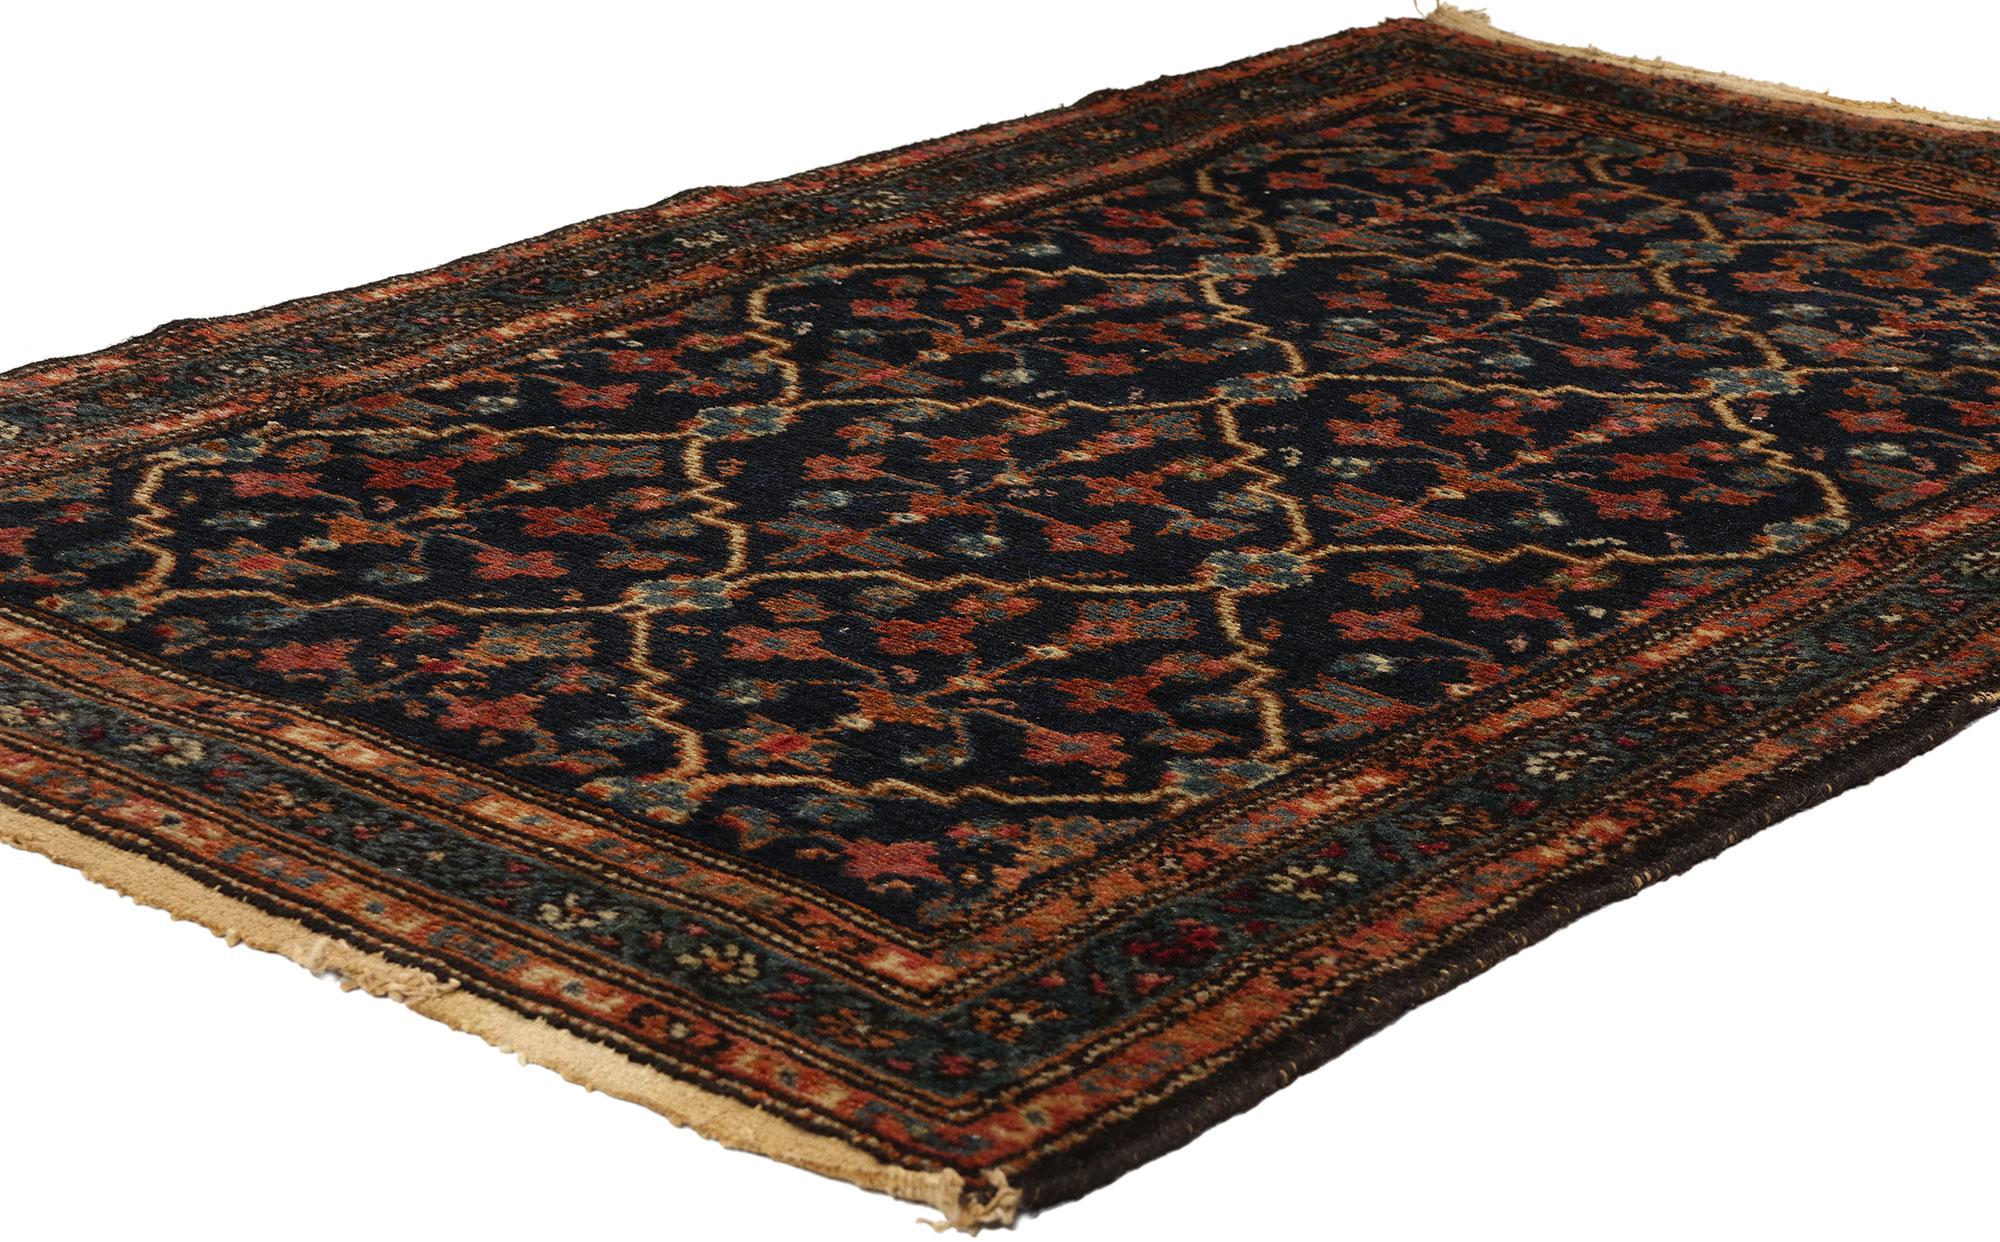 78737 Antique Black Persian Hamadan Rug, 02'10 x  04'05. Dive into the mysterious fusion of enigmatic elegance and timeless allure, encapsulated within the hand-knotted wool antique Persian Hamadan rug. The intricate compartmental design and the